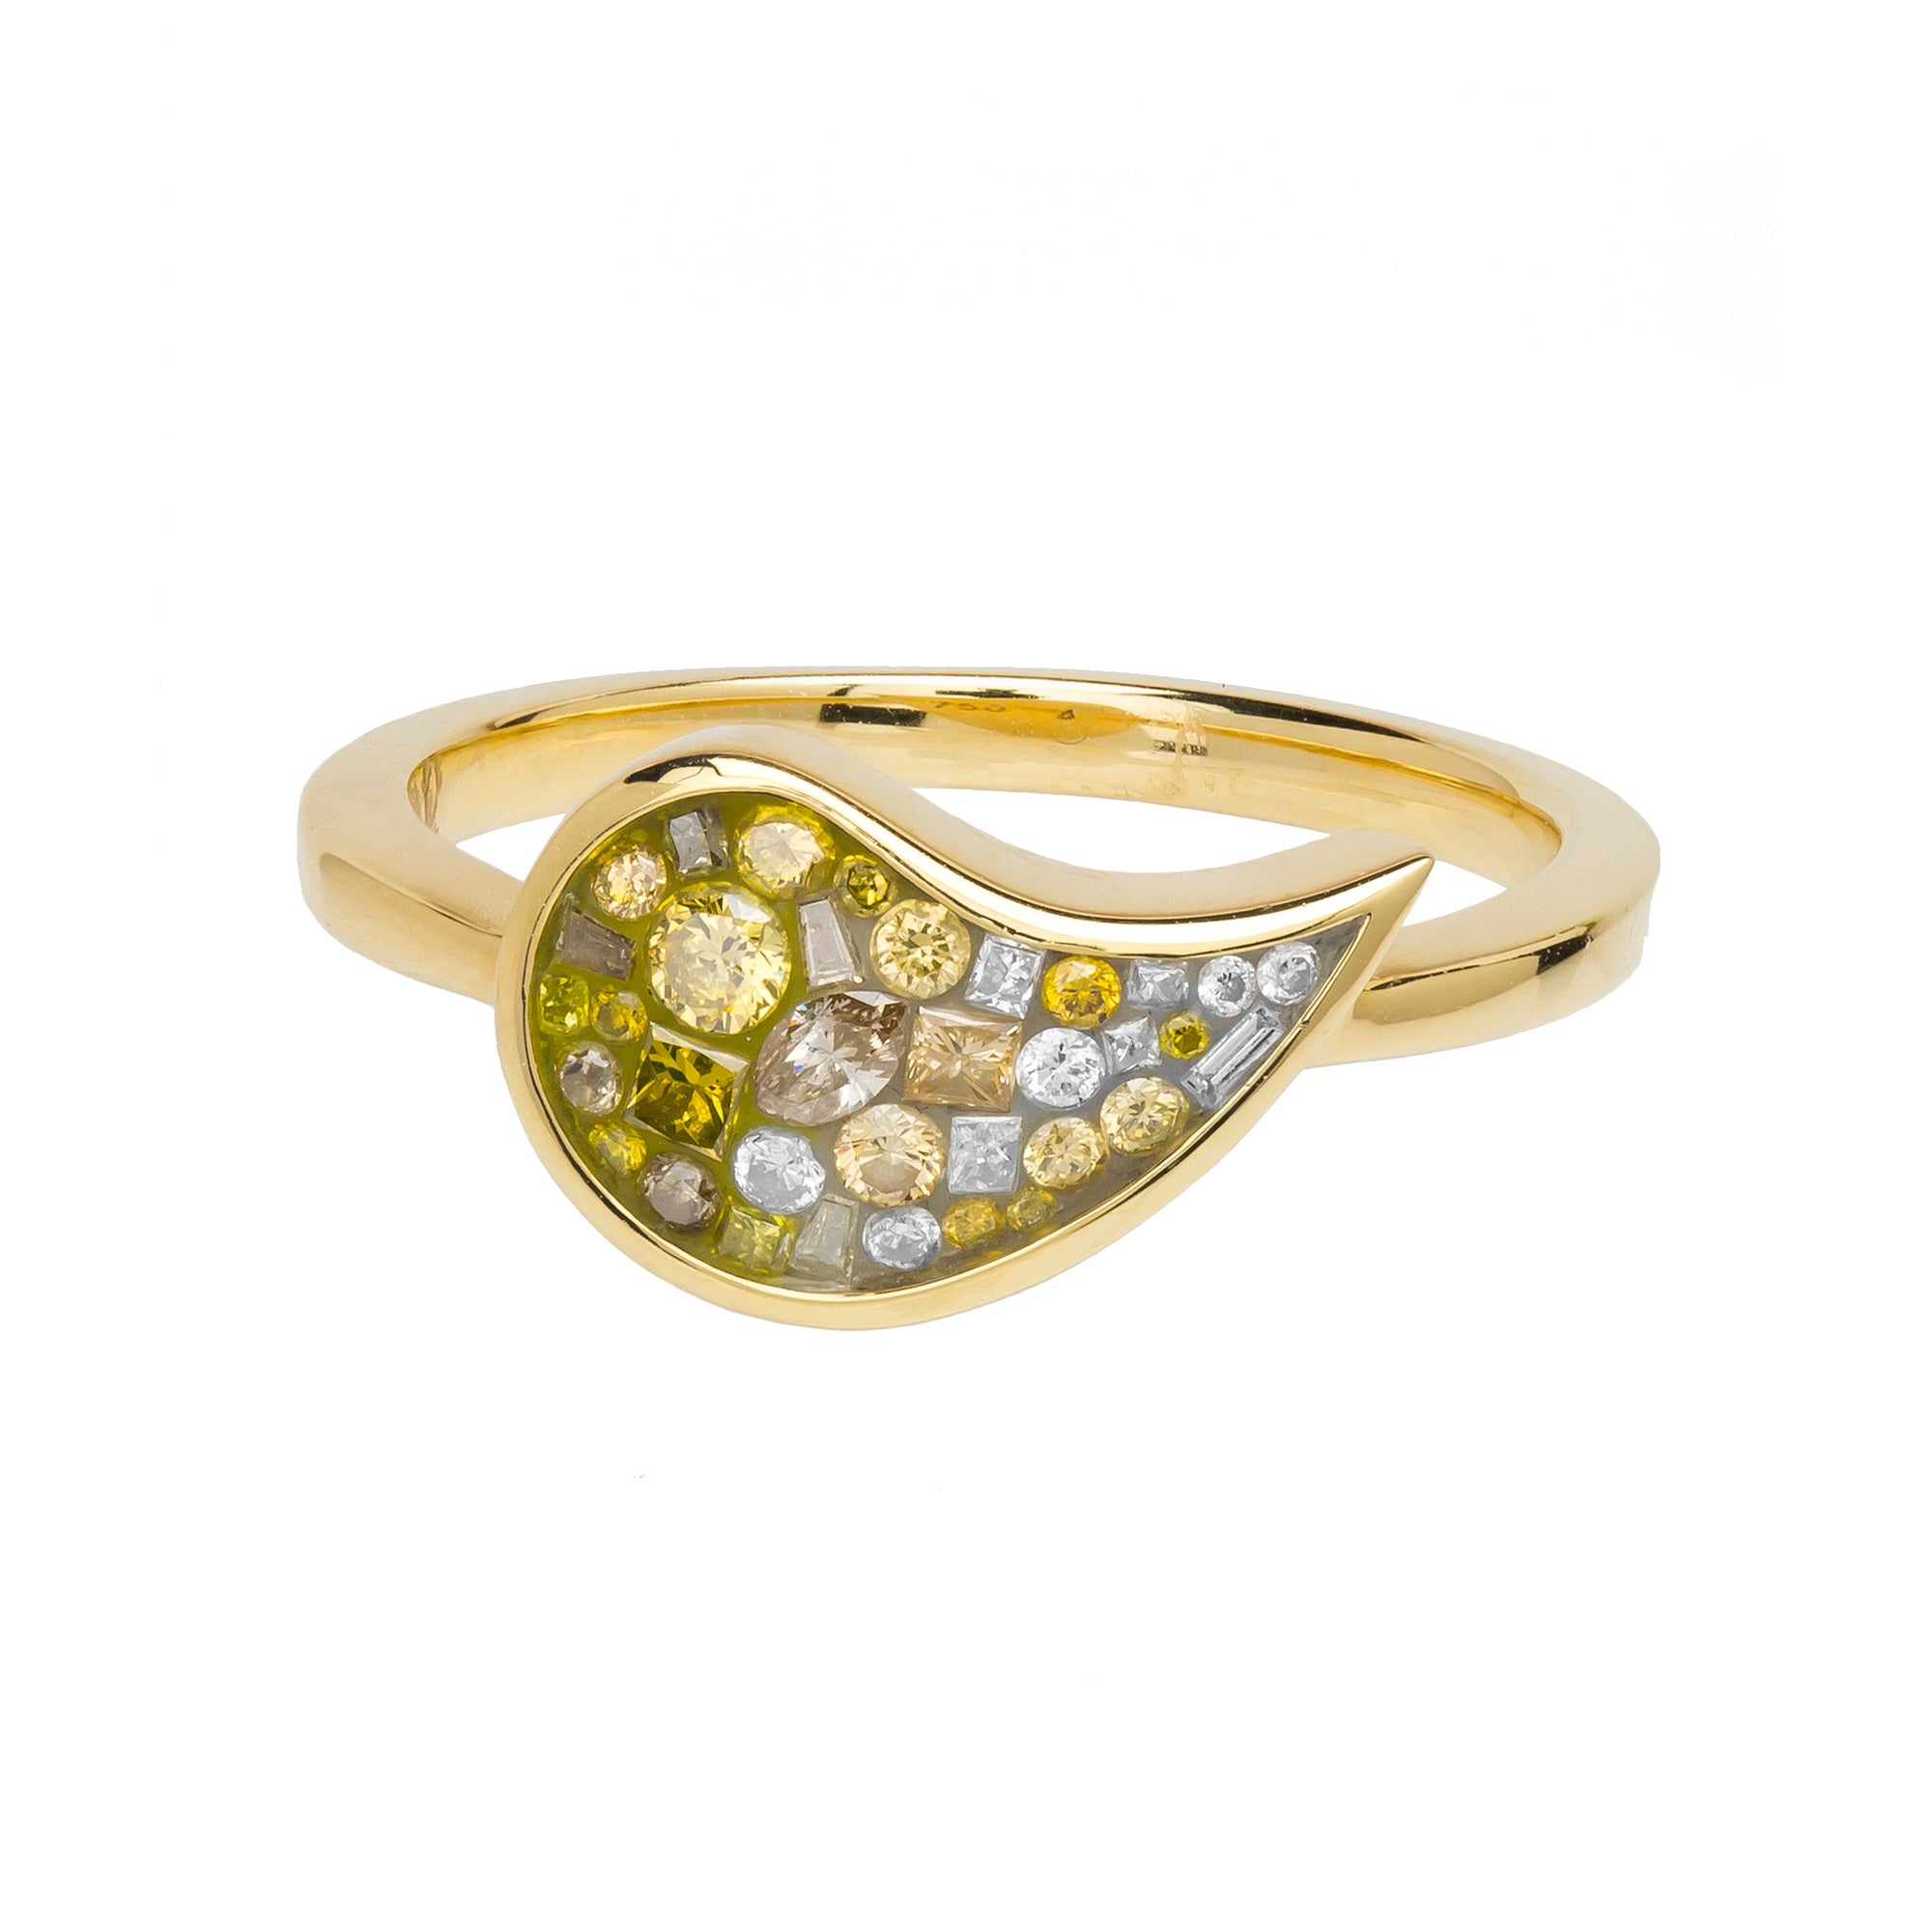 Yellow Ombre Diamond Paisley Ring by Pleve available at Talisman Collection Fine Jewelers in El Dorado Hills, CA and online. Specs: 45 cttw white & color enhanced diamonds, 18k yellow gold. 